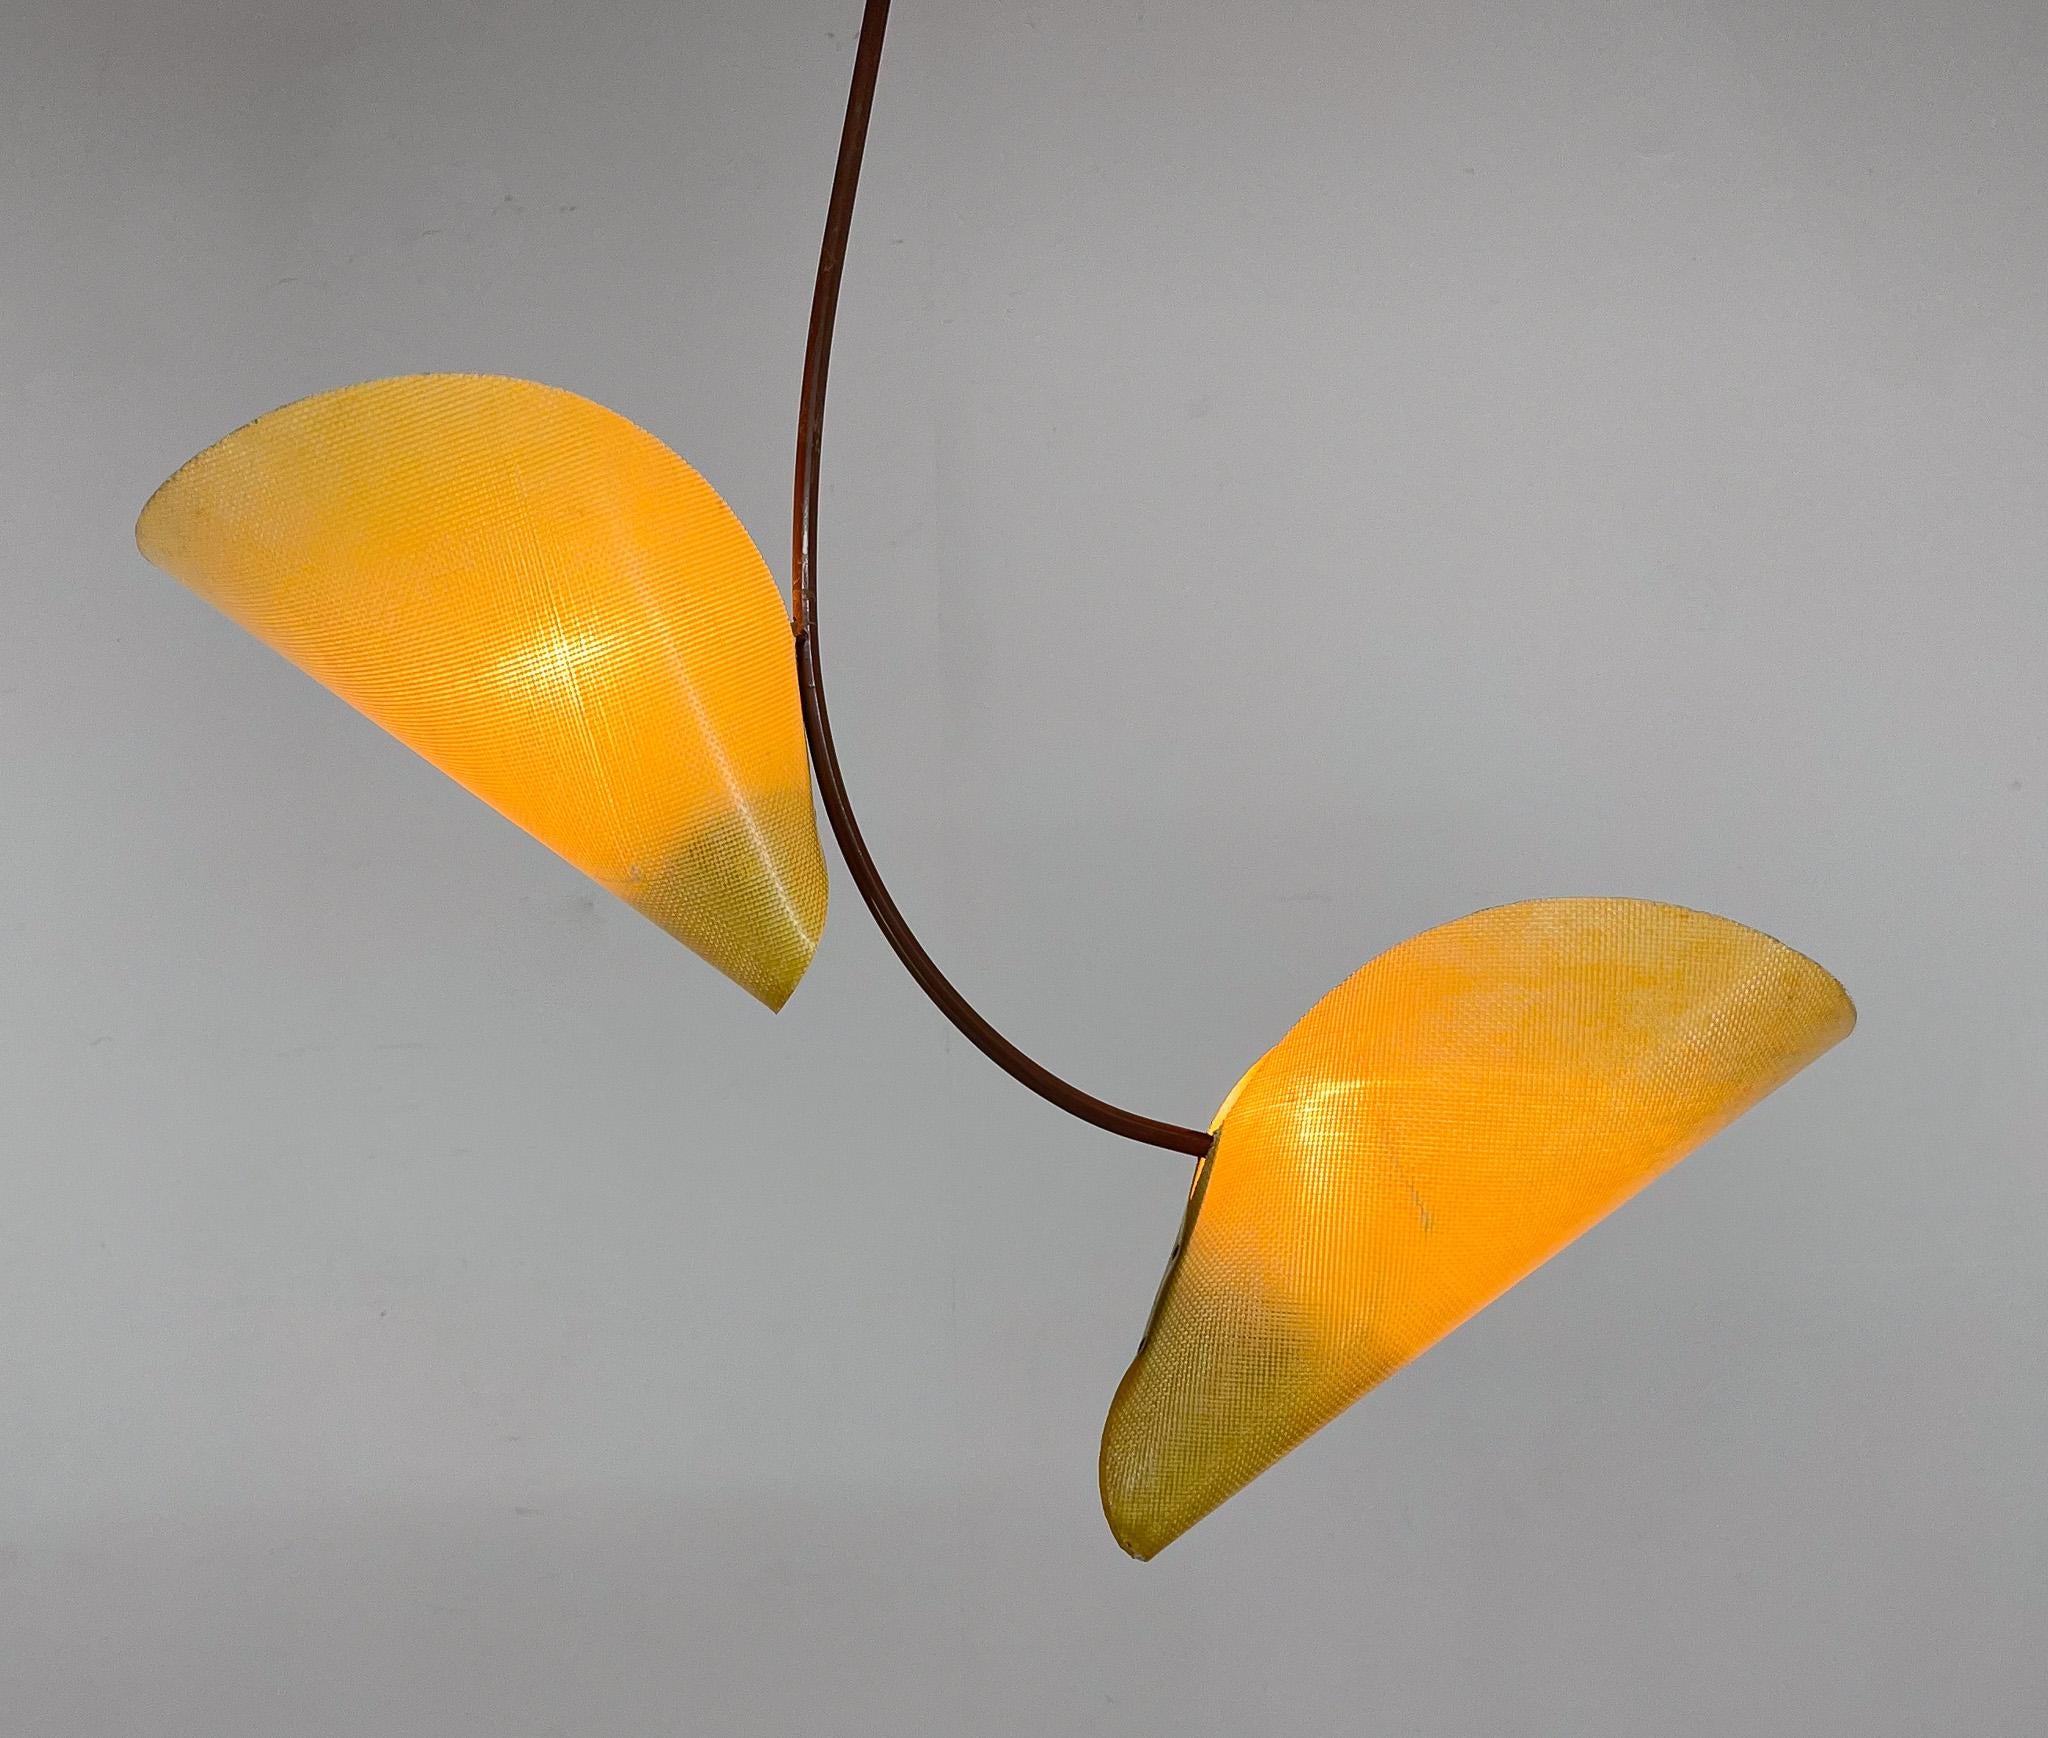 Midcentury modern pendant light / chandelier designed by th famous Josef Hurka and produced by Napako in former Czechoslovakia in the 1960's. Made of metal with fibreglass lamp shades. 
Bulbs: 2x 1 E26-27. US wiring compatible.